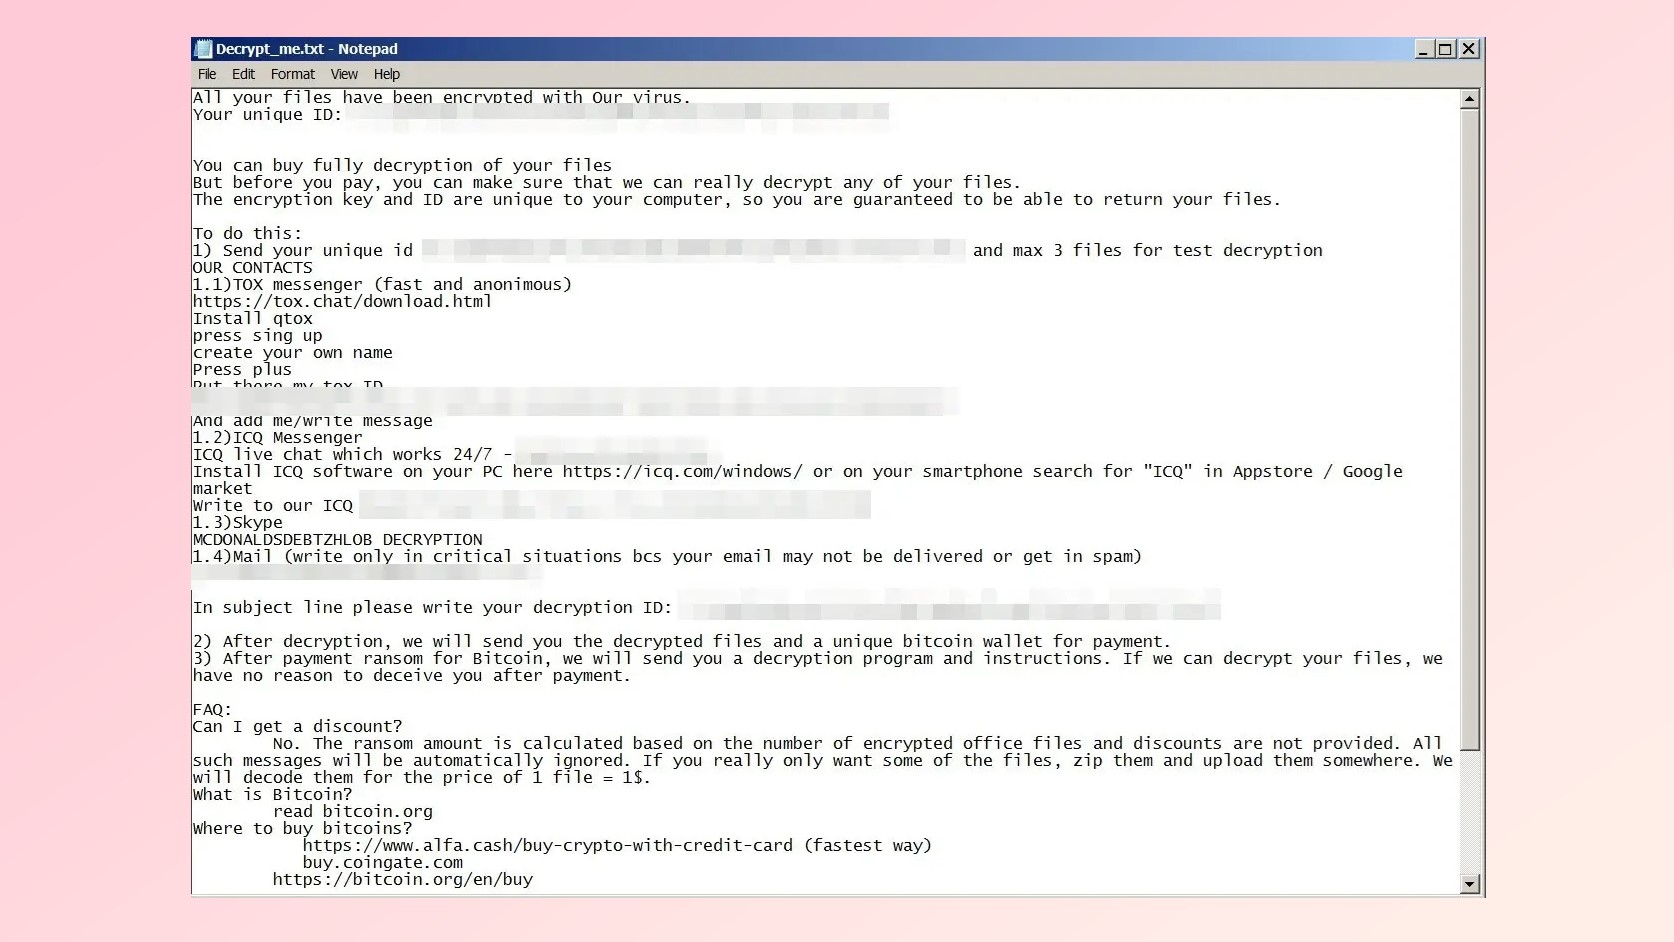 A ransom note left on a computer infected with Mimic ransomware